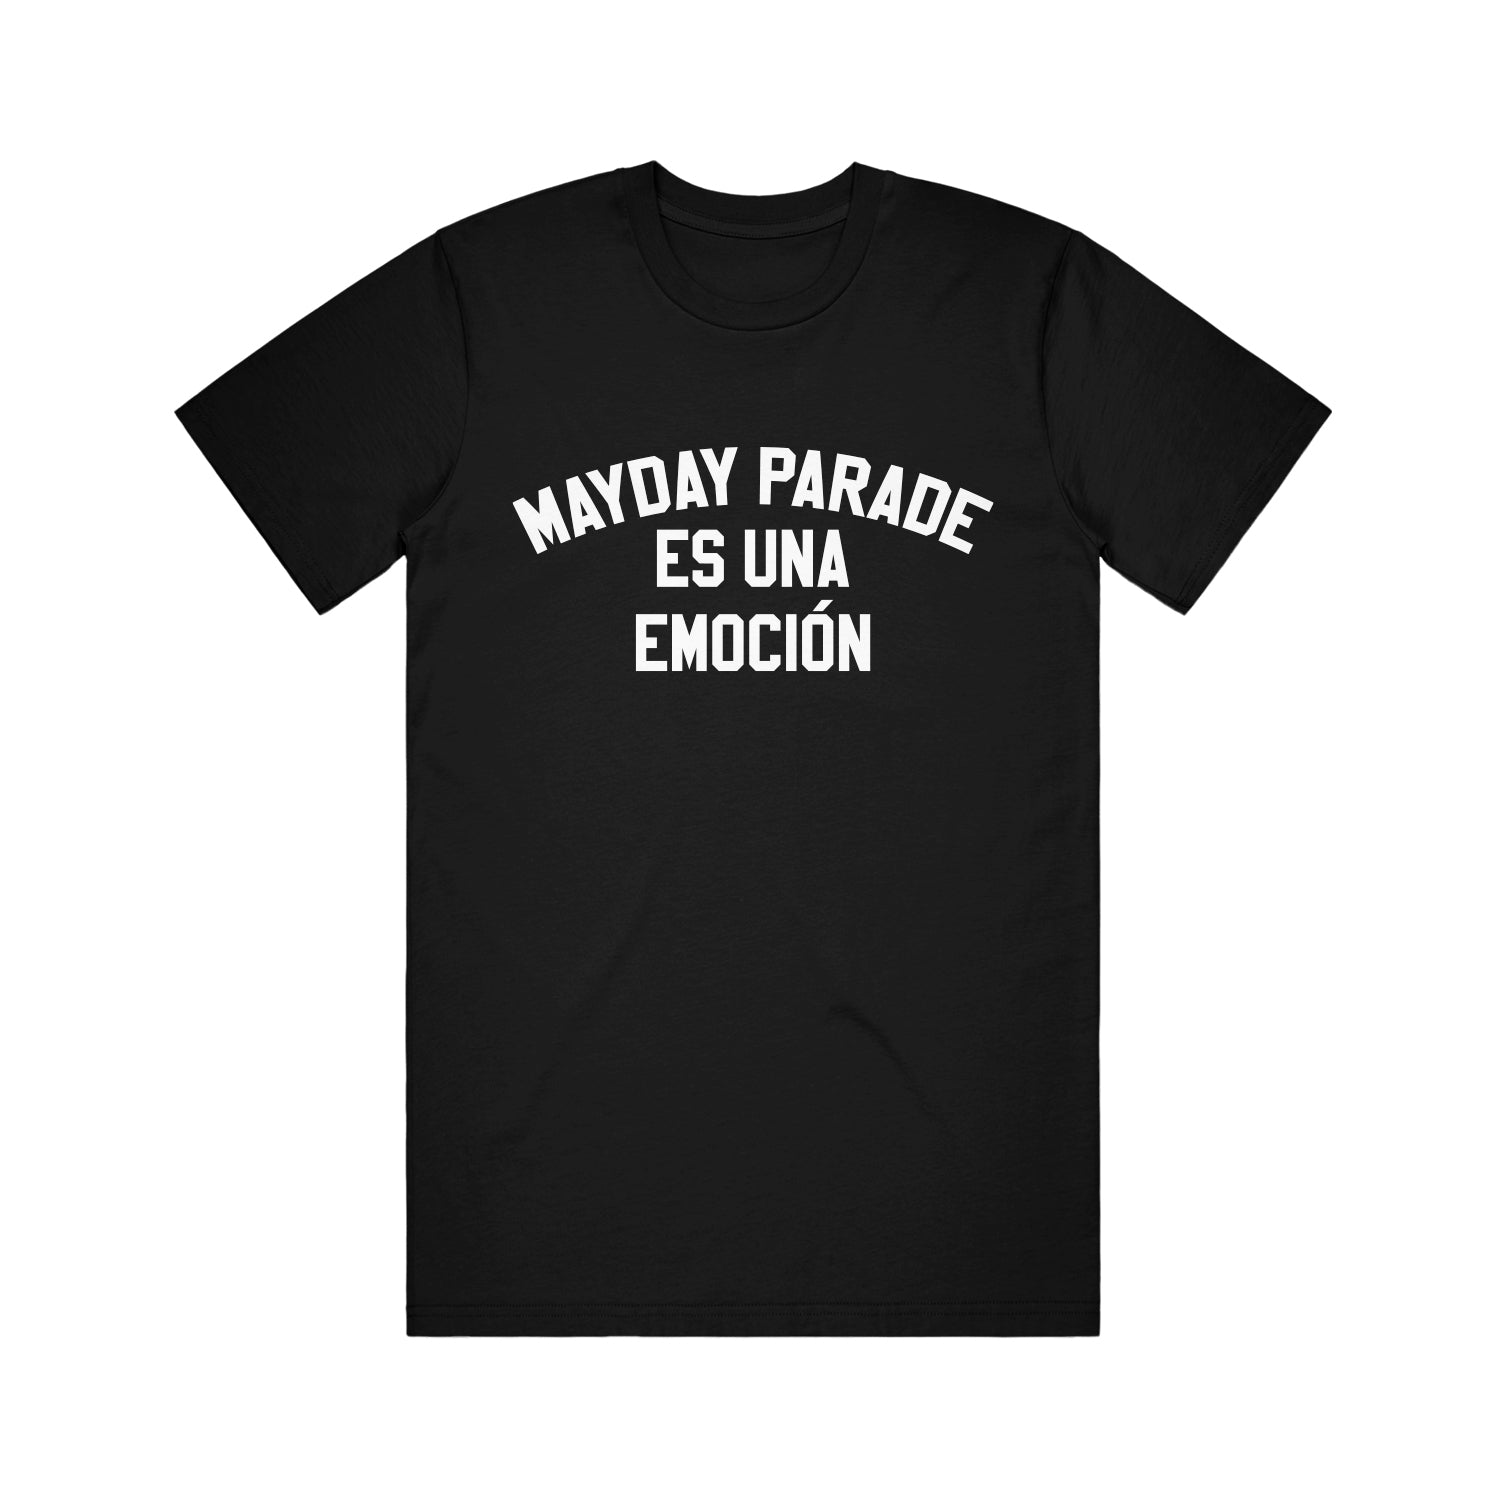 image of a black tee shirt on a white background. tee has white print on the center chest that says mayday parade es una emocion